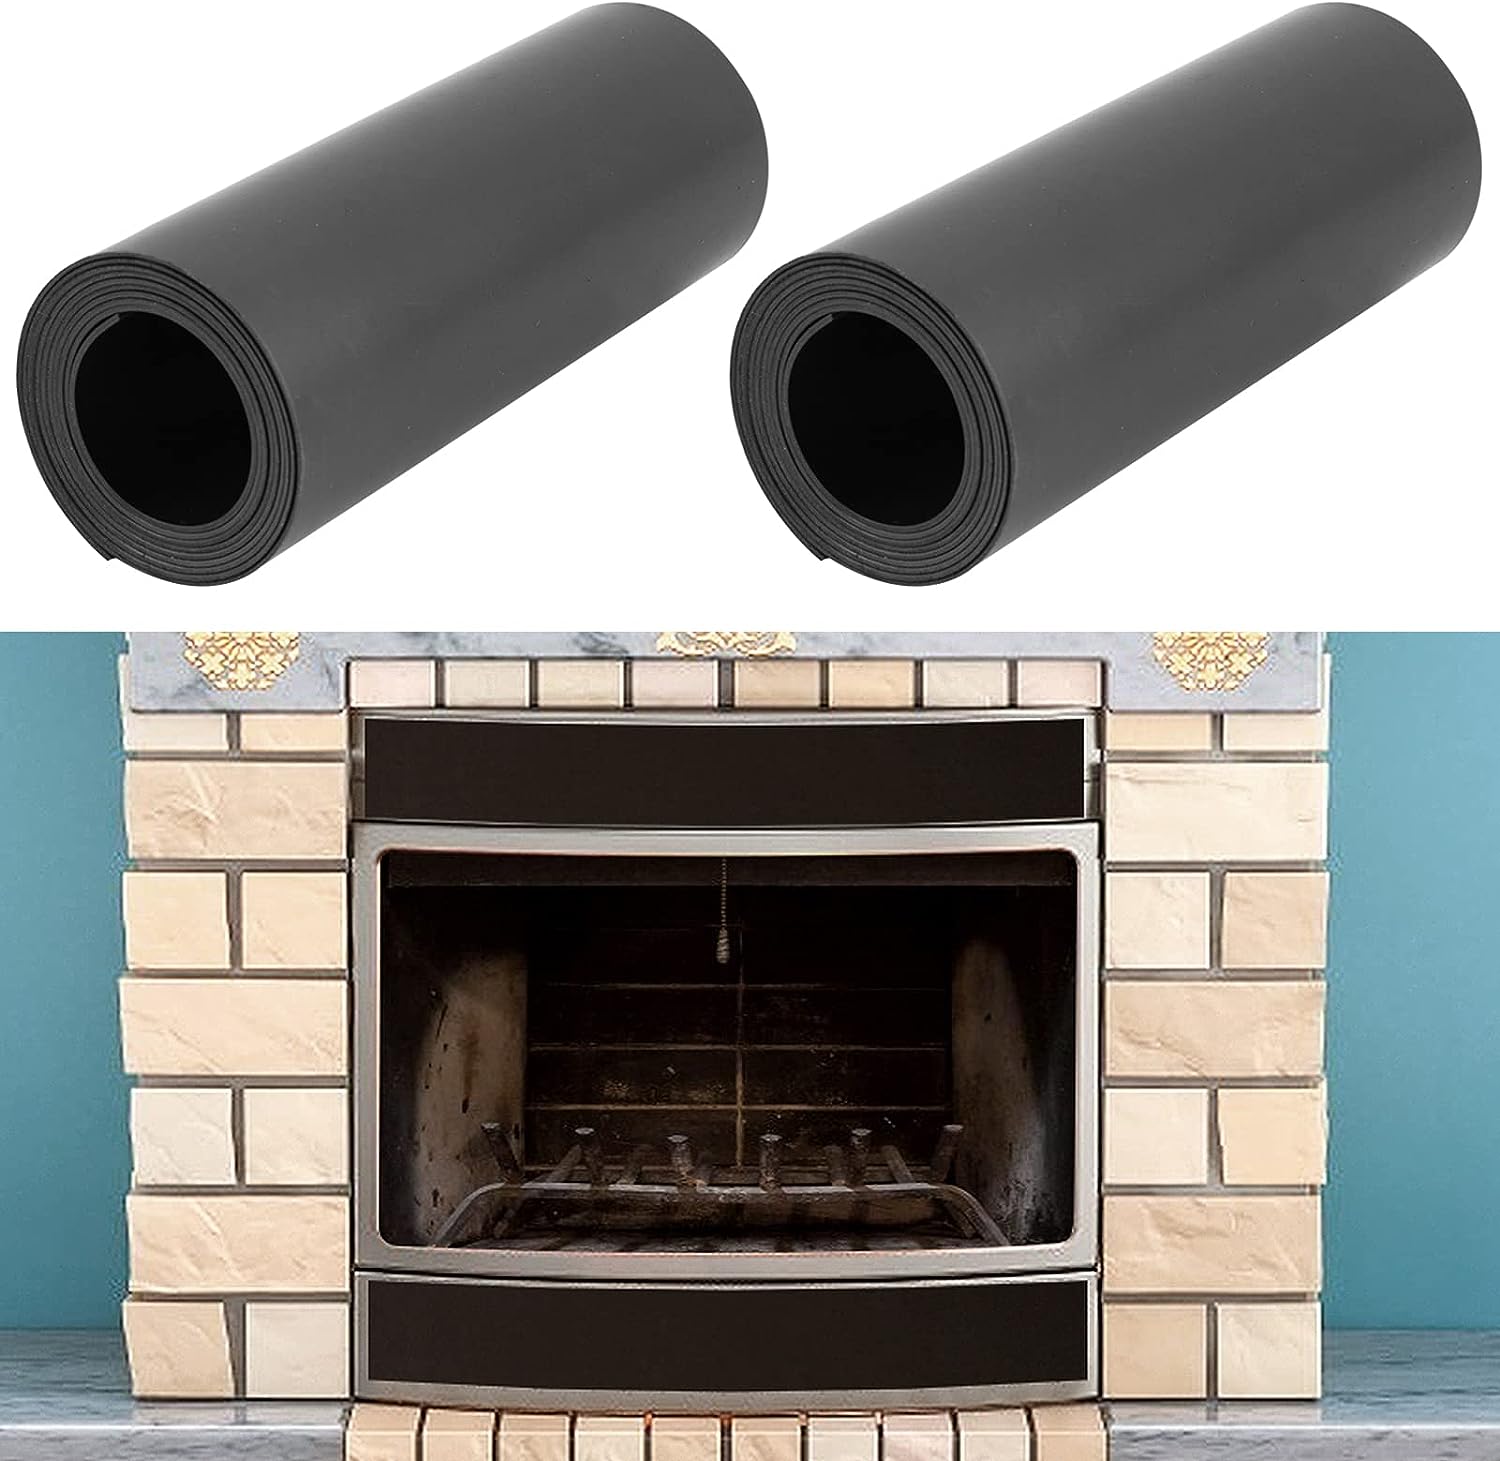 Beeplove Magnetic Fireplace Draft Stopper - 2pcs Fireplace Vent Covers, Screen Insulation Blocker for Winter Indoor Prevent Cold Air and Heat Loss (